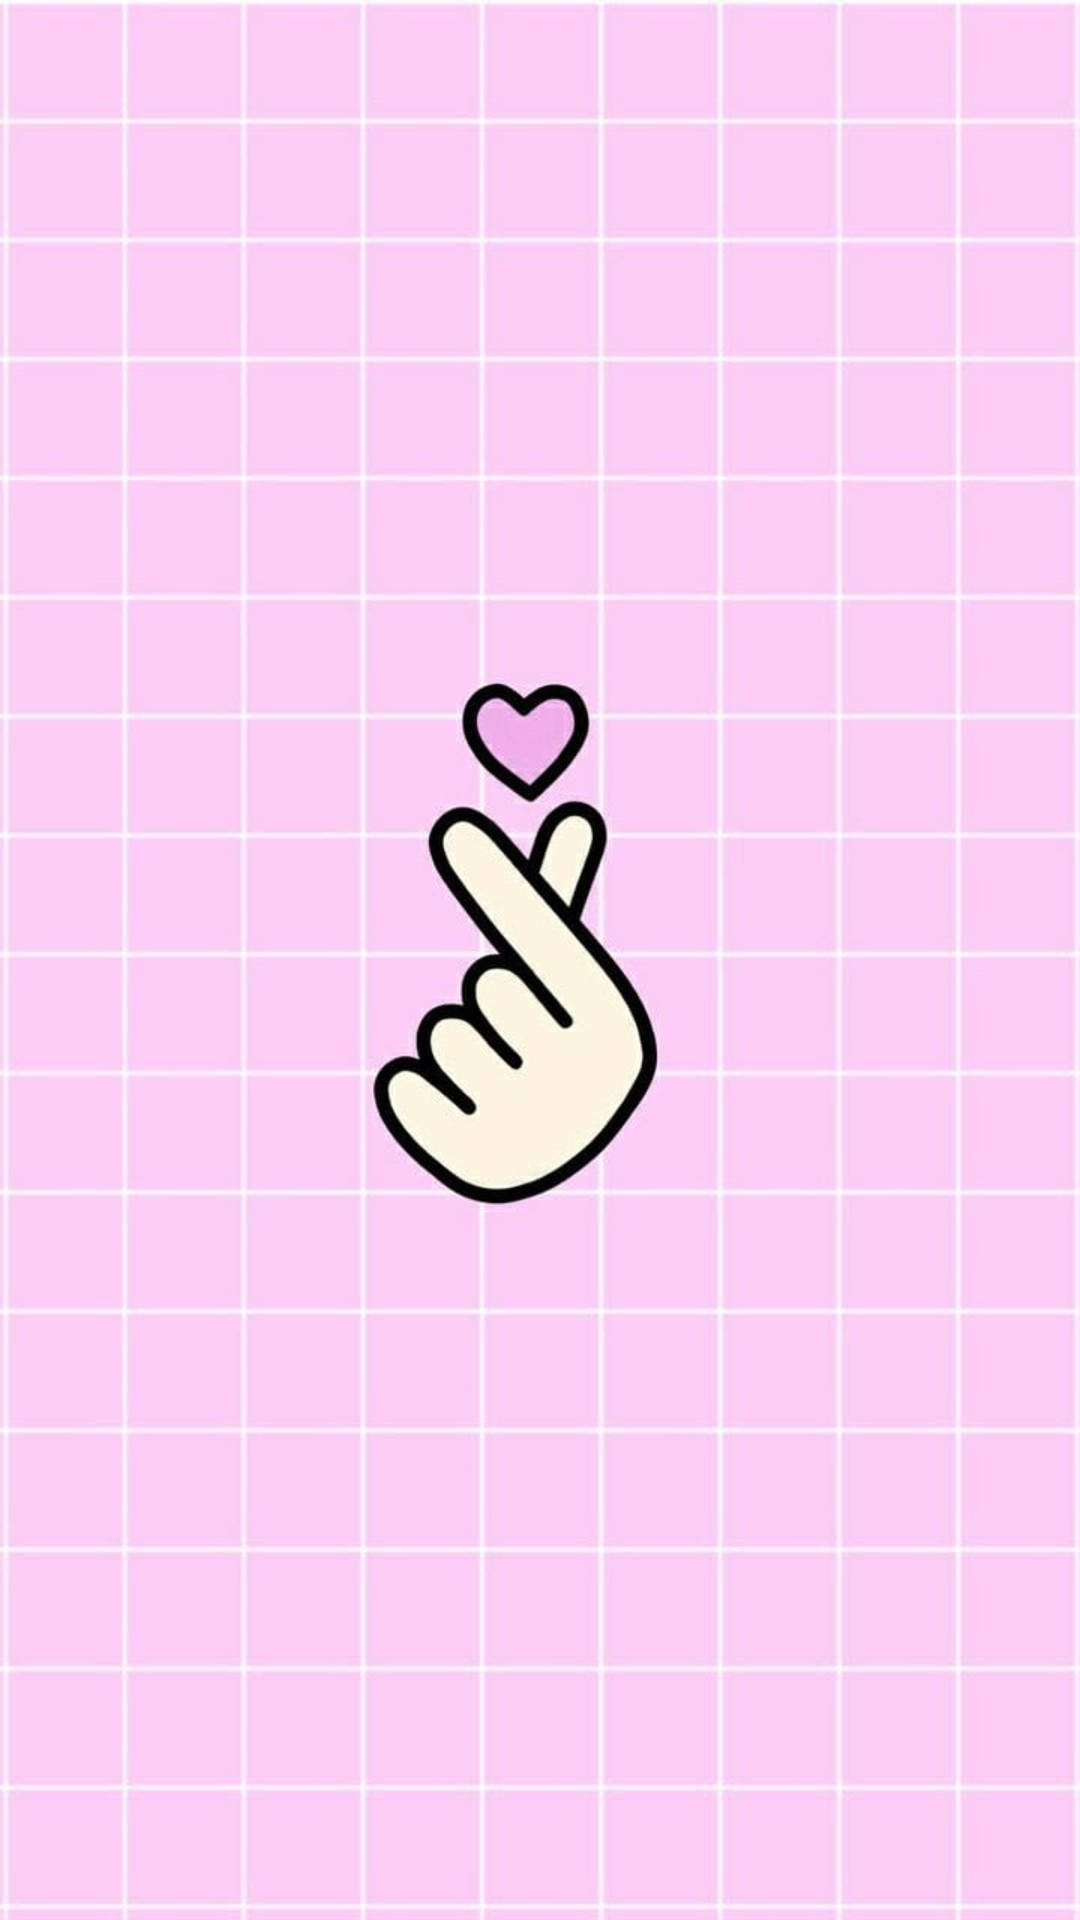 Saranghae Heart On A Pink Grid Background